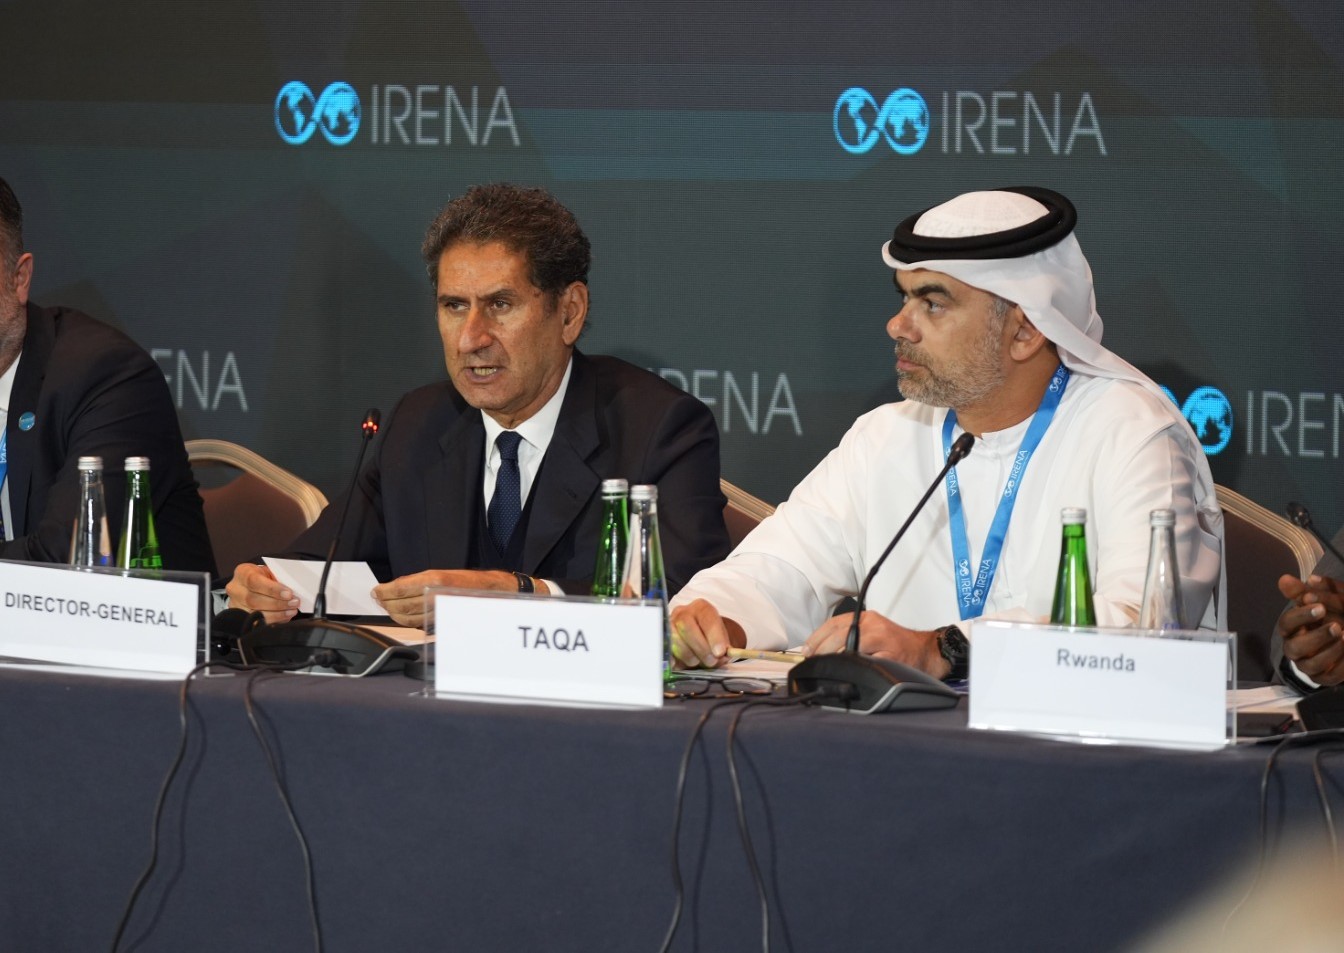 UNEZA announces joint intent to scale renewable capacity by 2.5 times to 2030 